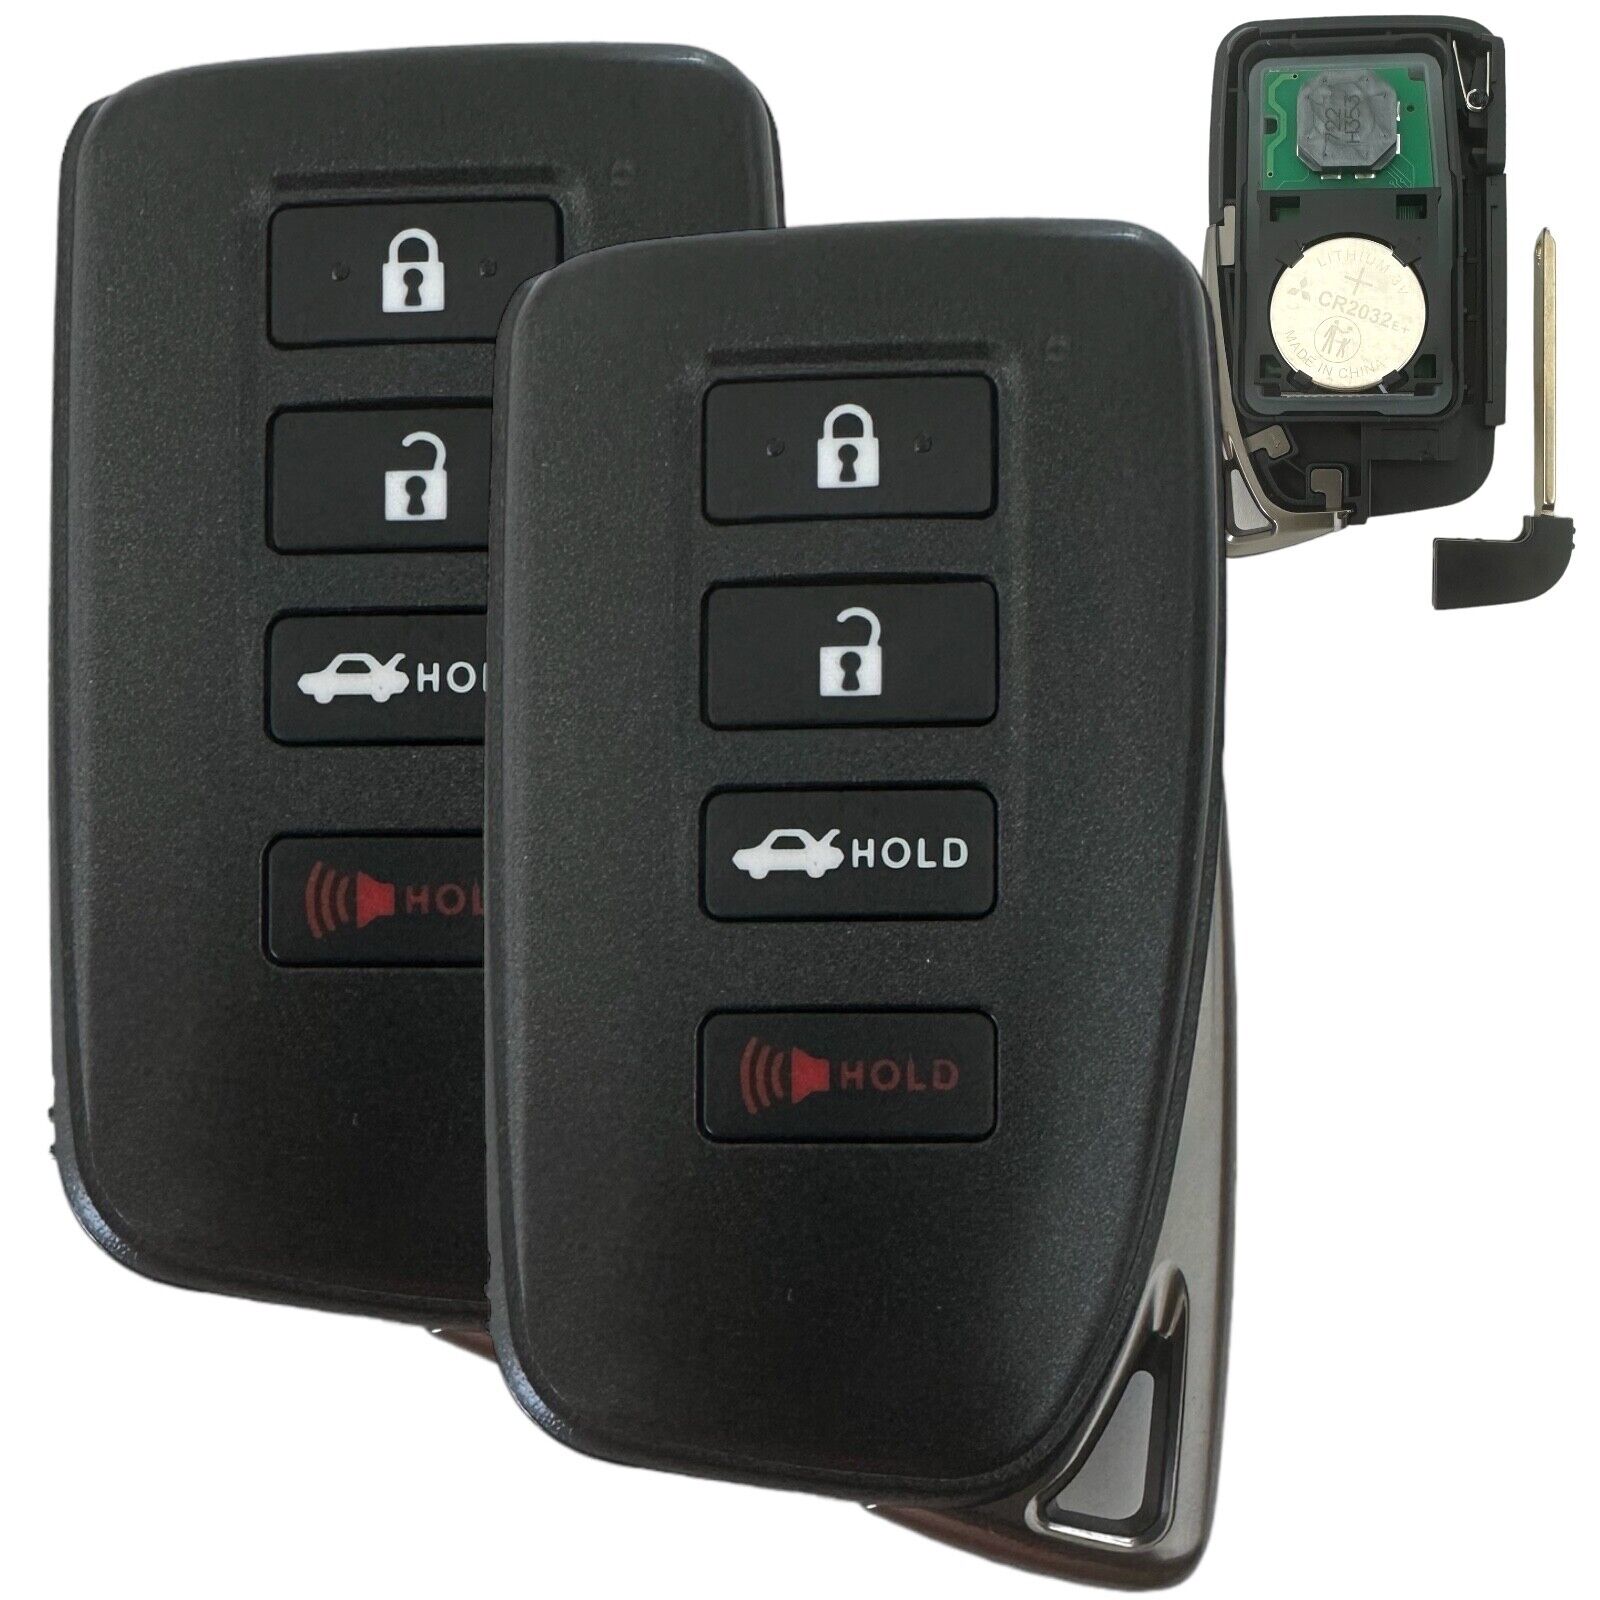 2 Replacement For Lexus 2015-2020 Late-LX570 NX200t NX300 NX300h Key Fob Remote